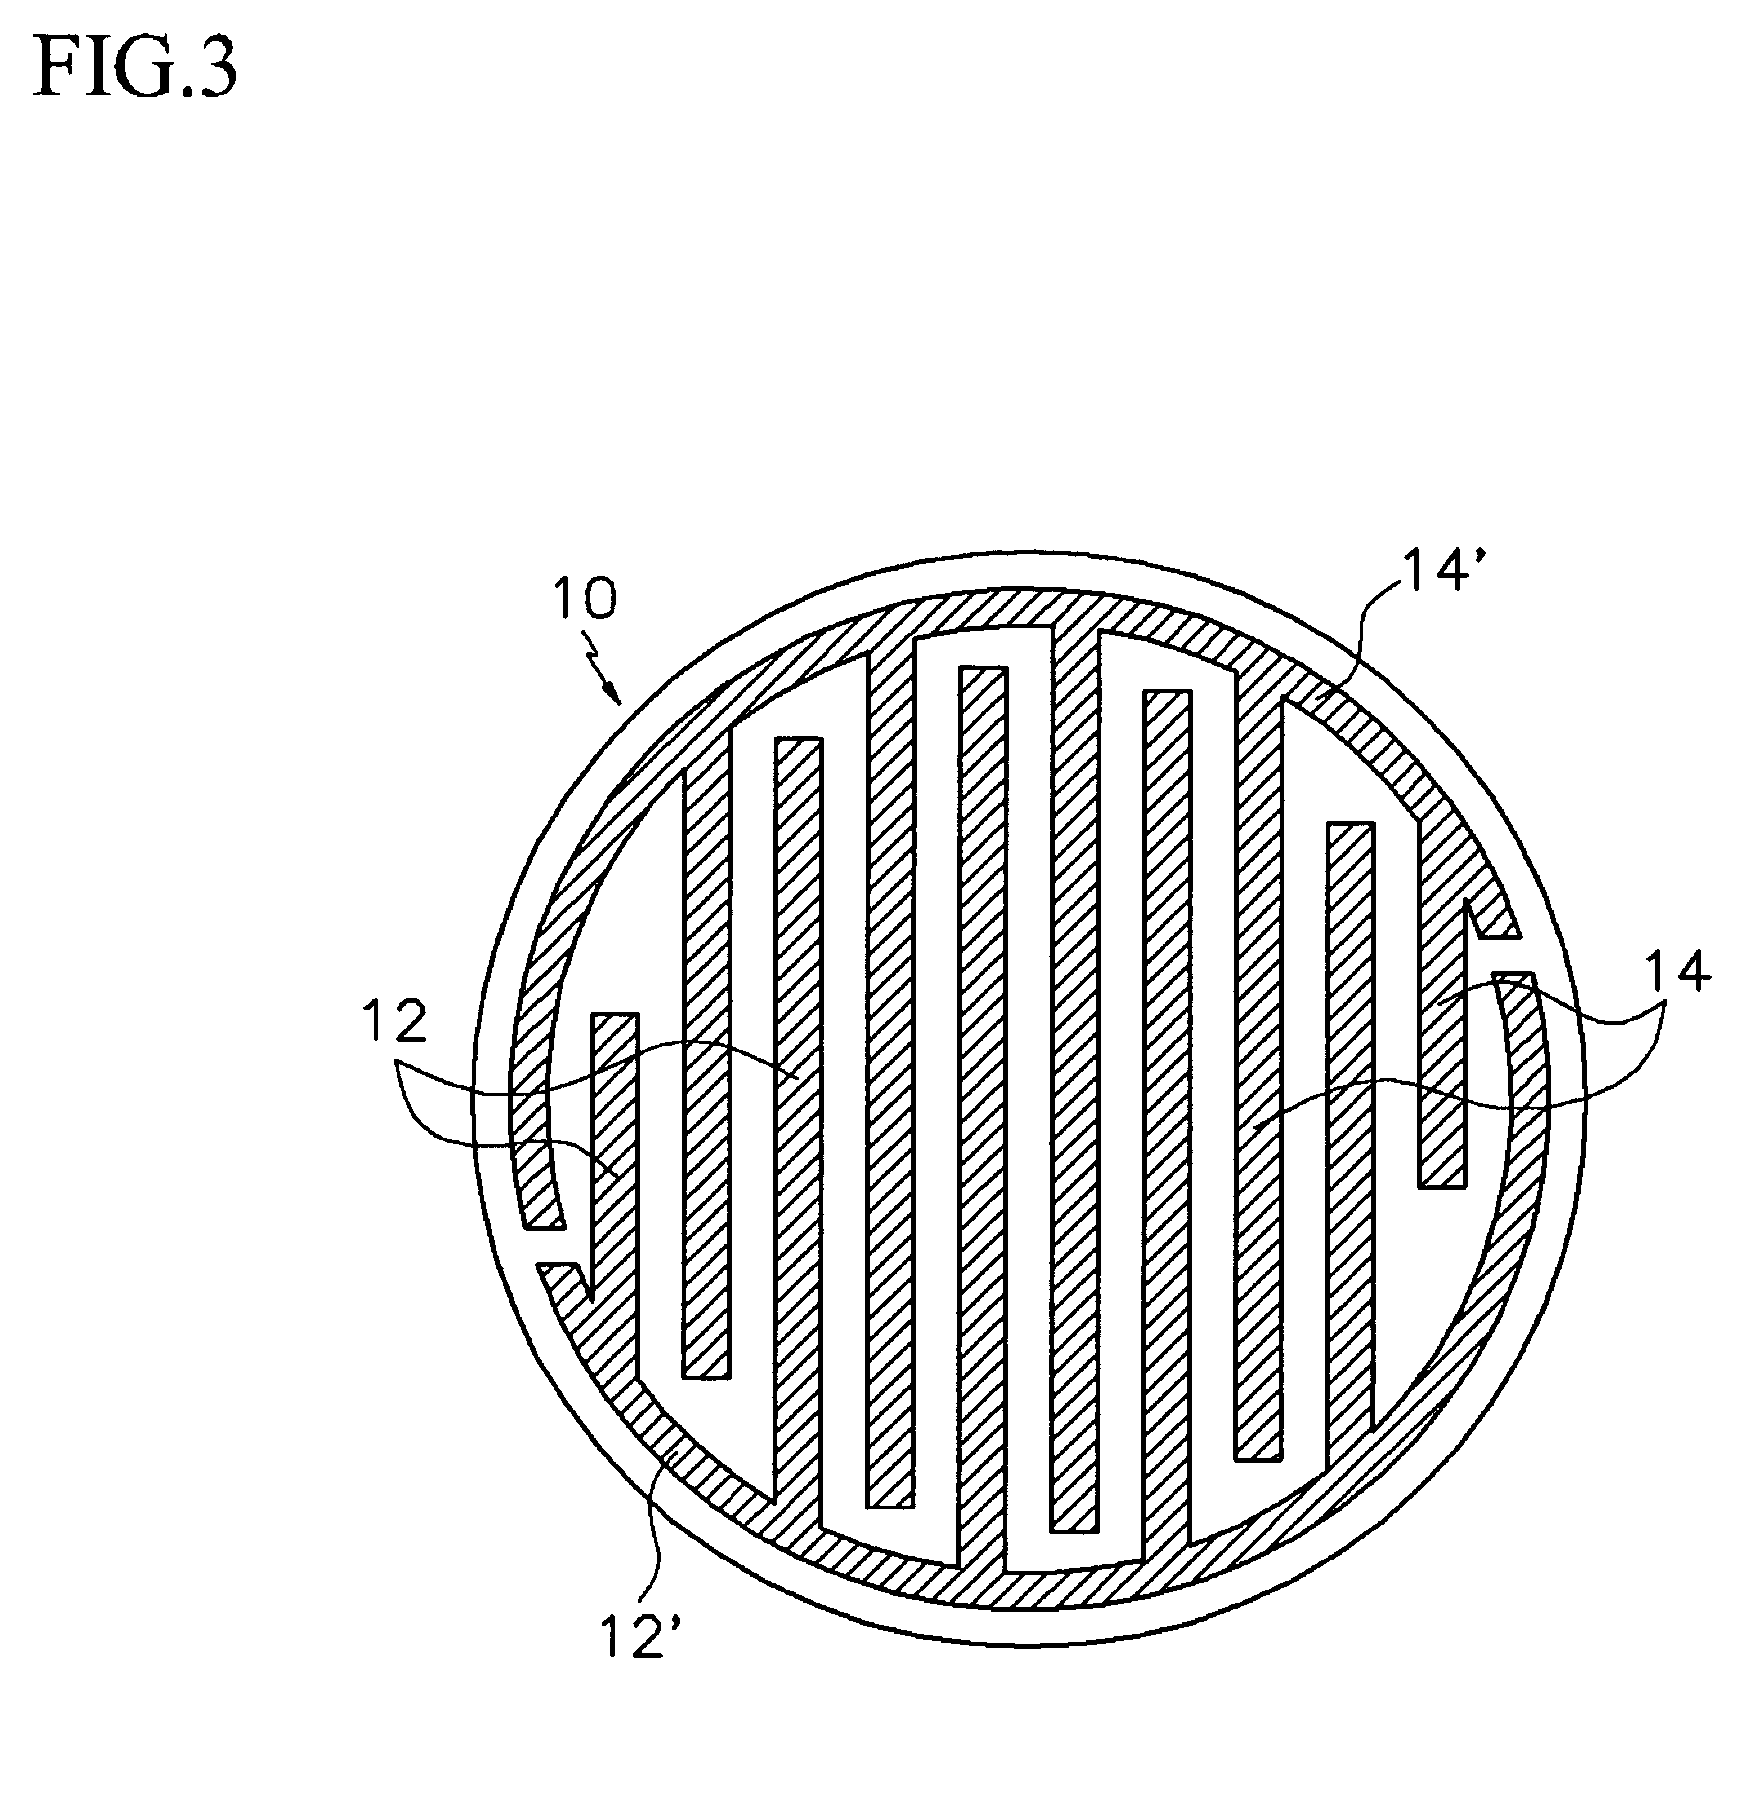 Electrostatic chuck of semiconductor fabrication equipment and method for chucking wafer using the same